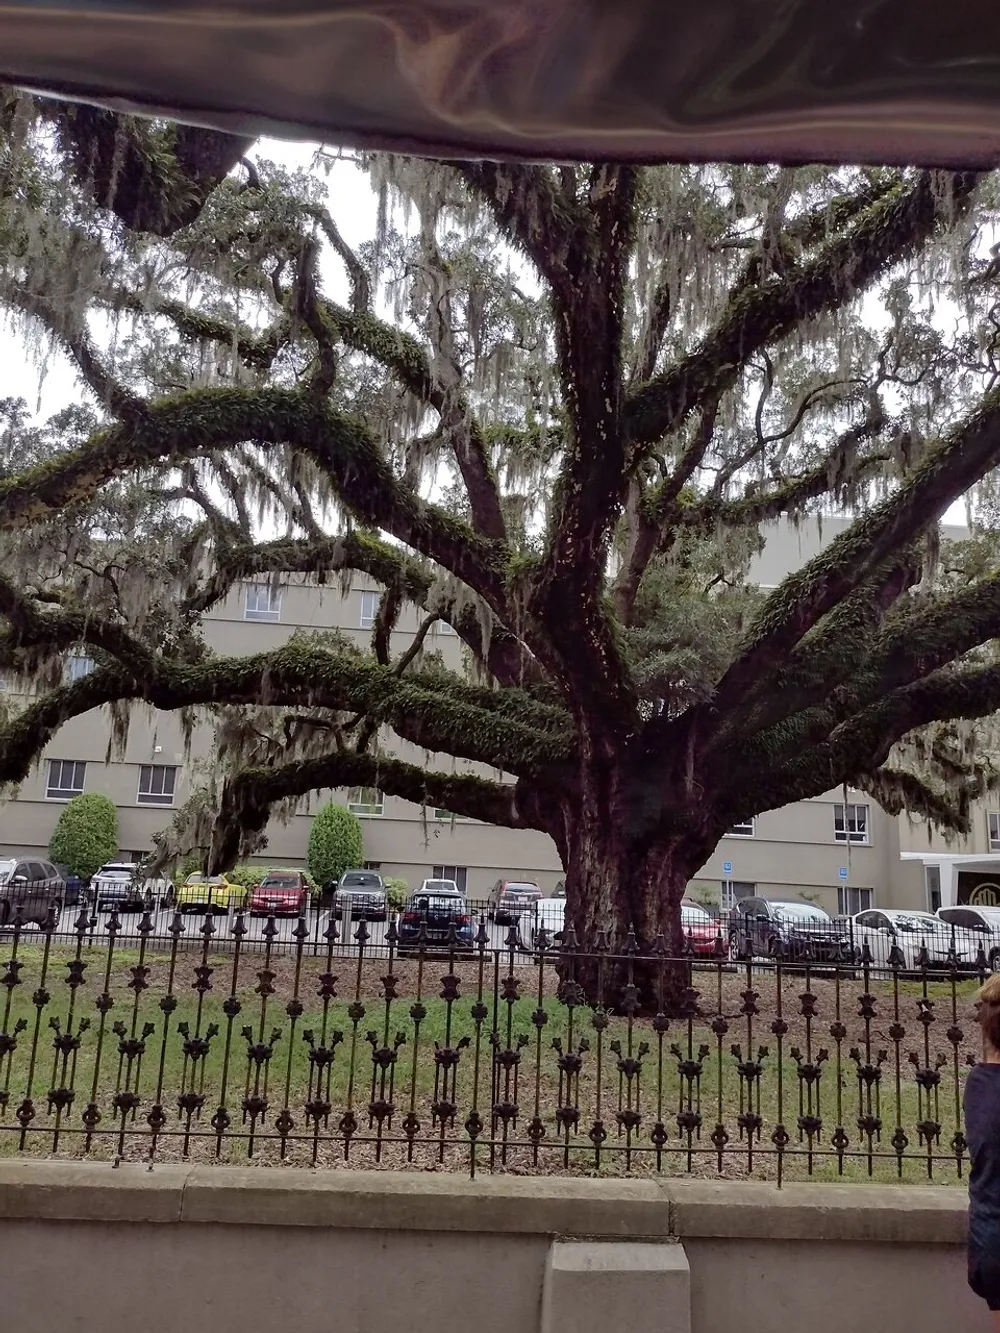 A majestic tree with sprawling branches draped in Spanish moss stands behind an ornate iron fence with cars parked in the background and the edge of a persons silhouette visible on the right